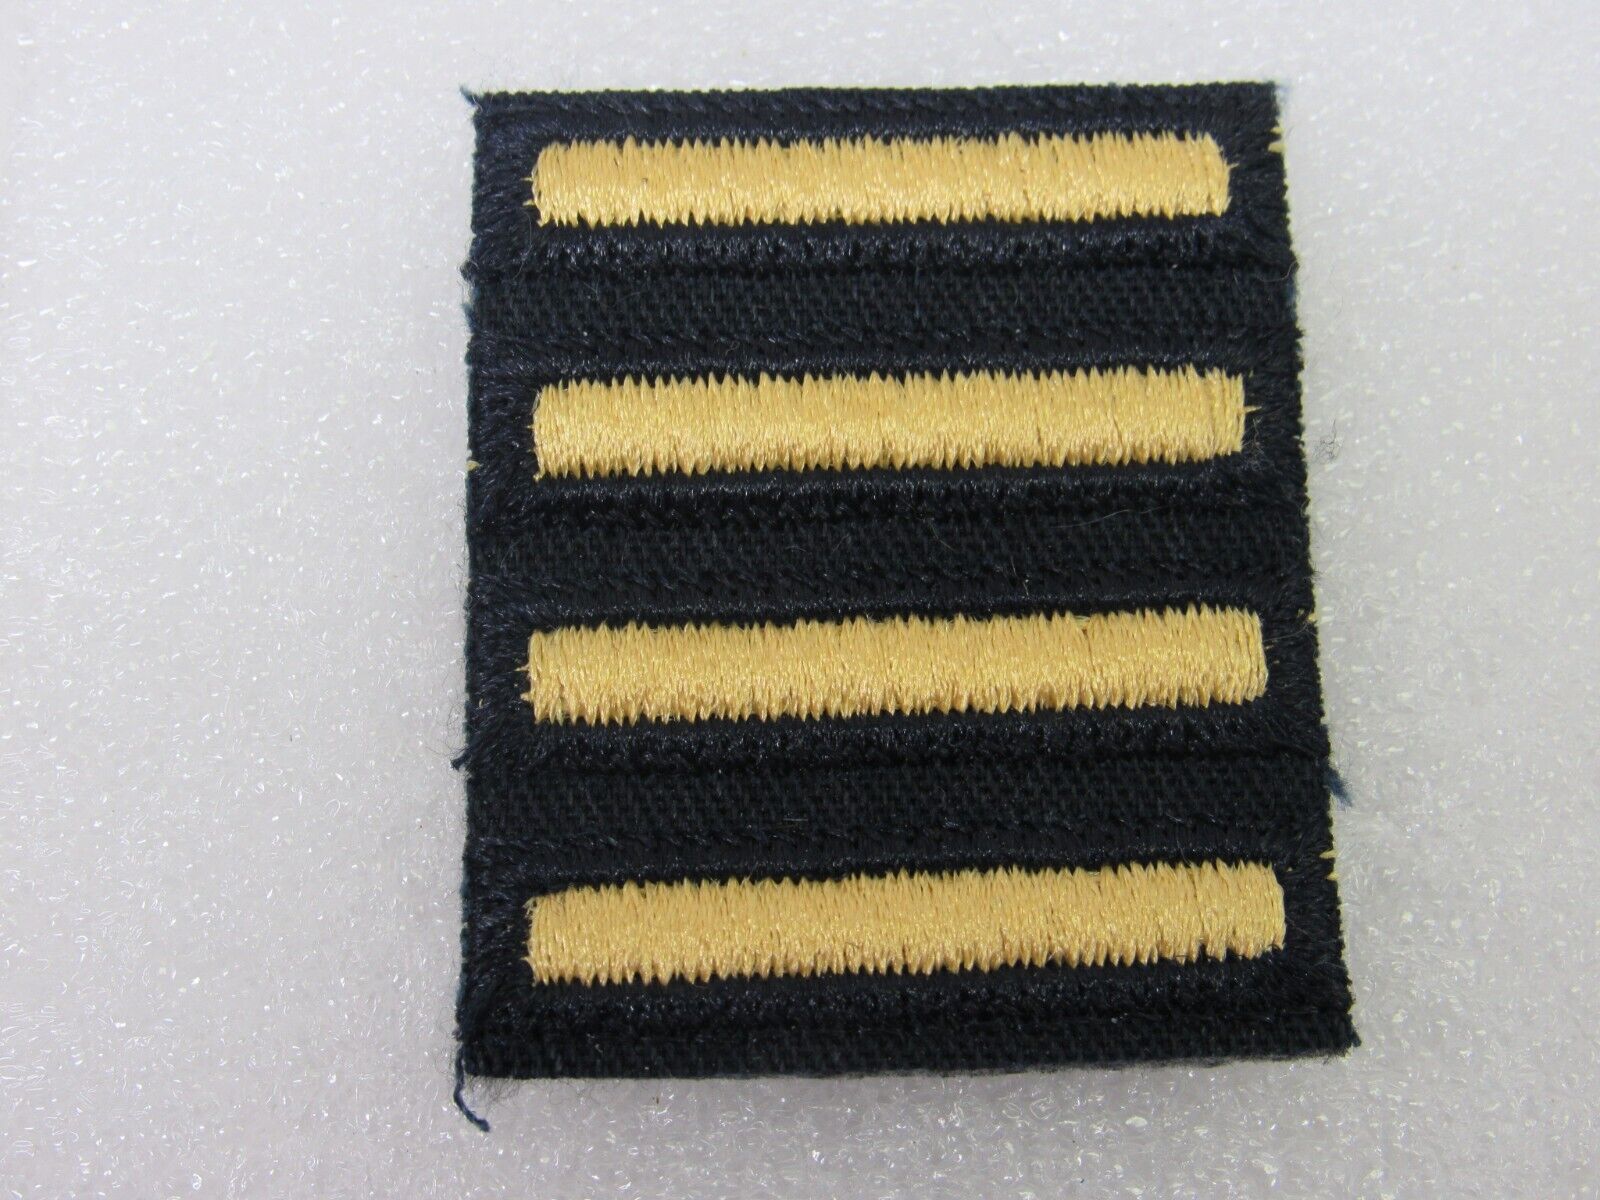 US Army Overseas Service Stripe Bars 4 Bars 2 Years Or 24 Months Of Service, New